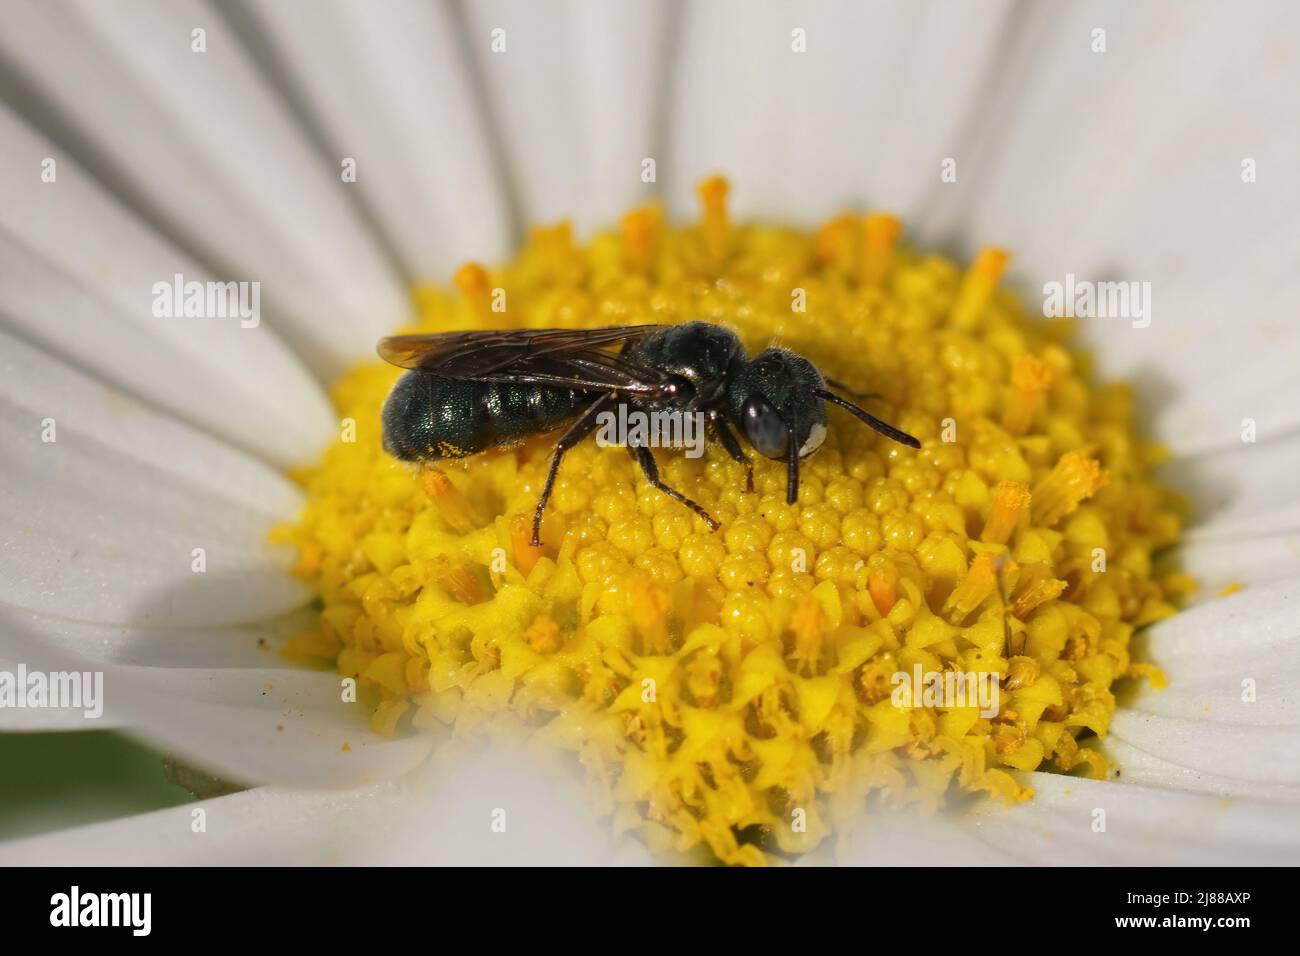 Closeup on a male, small metallic blue carpenter bee, Ceratina cyanea, sitting on a yellow , white flower in the field Stock Photo